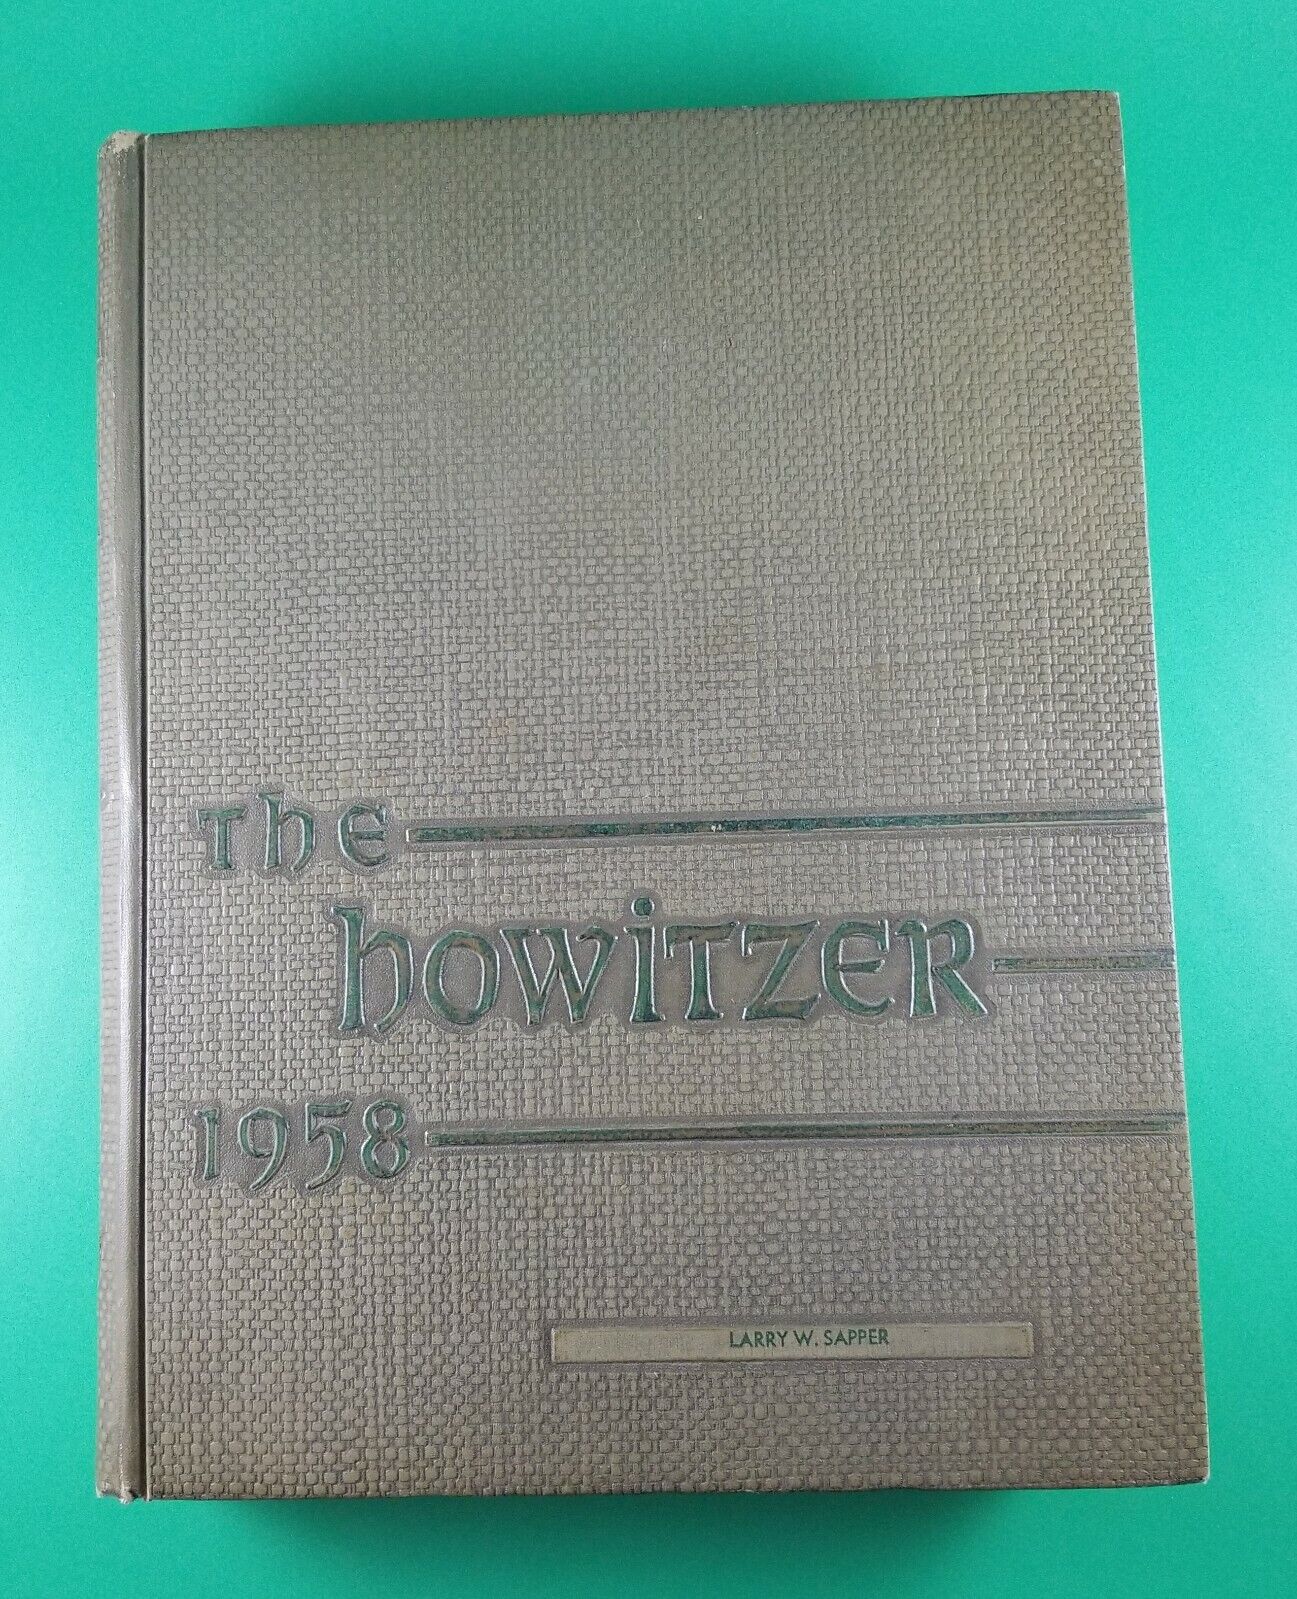 1958 U.S. MILITARY ACADEMY YEARBOOK HOWITZER WEST POINT